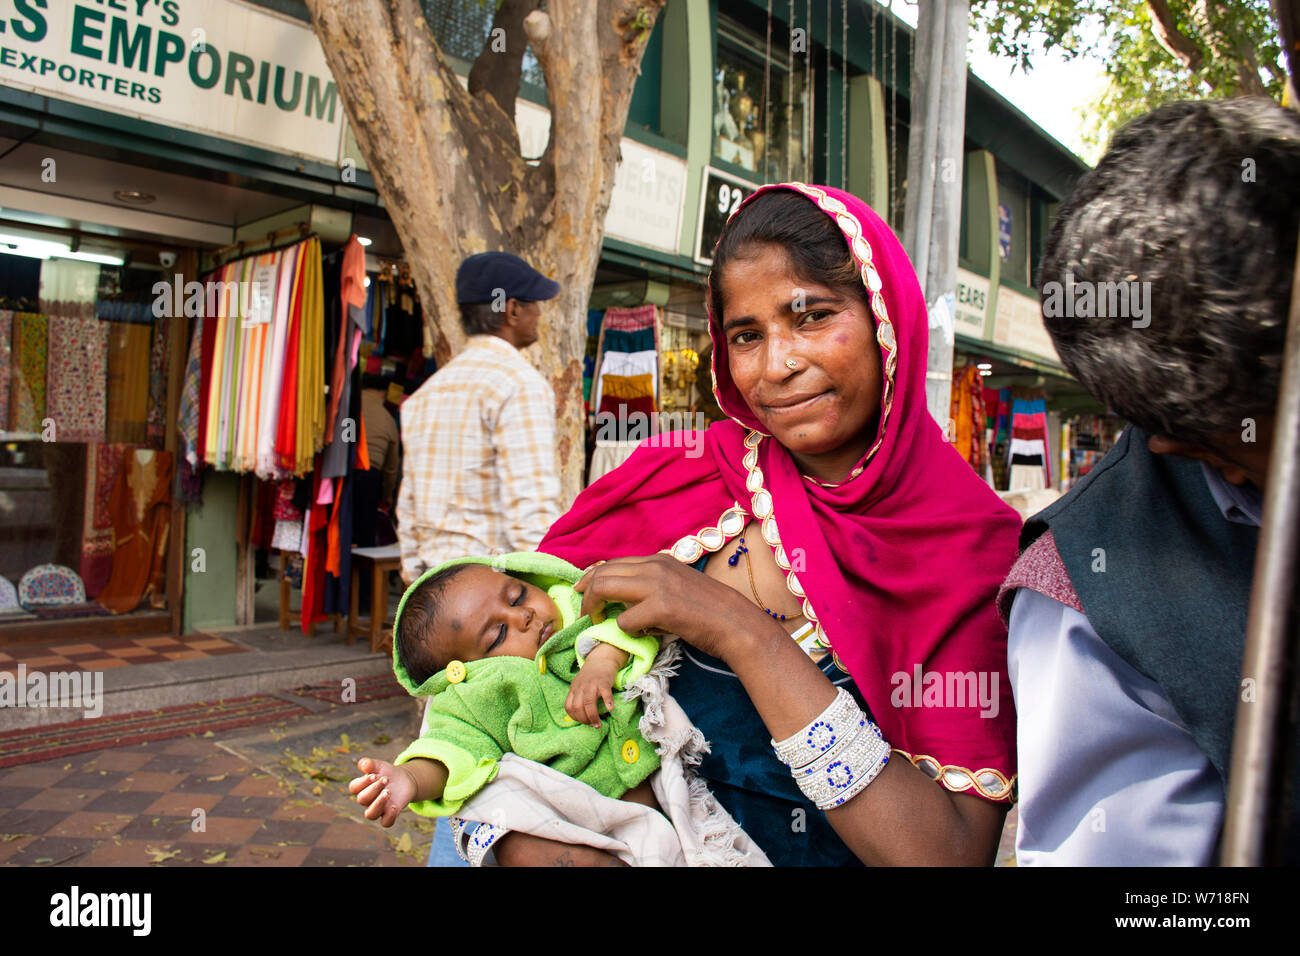 Indian women beggar or untouchables caste hold baby and begging money from travelers people at Janpath Market and Dilli Haat bazaar on March 17, 2019 Stock Photo